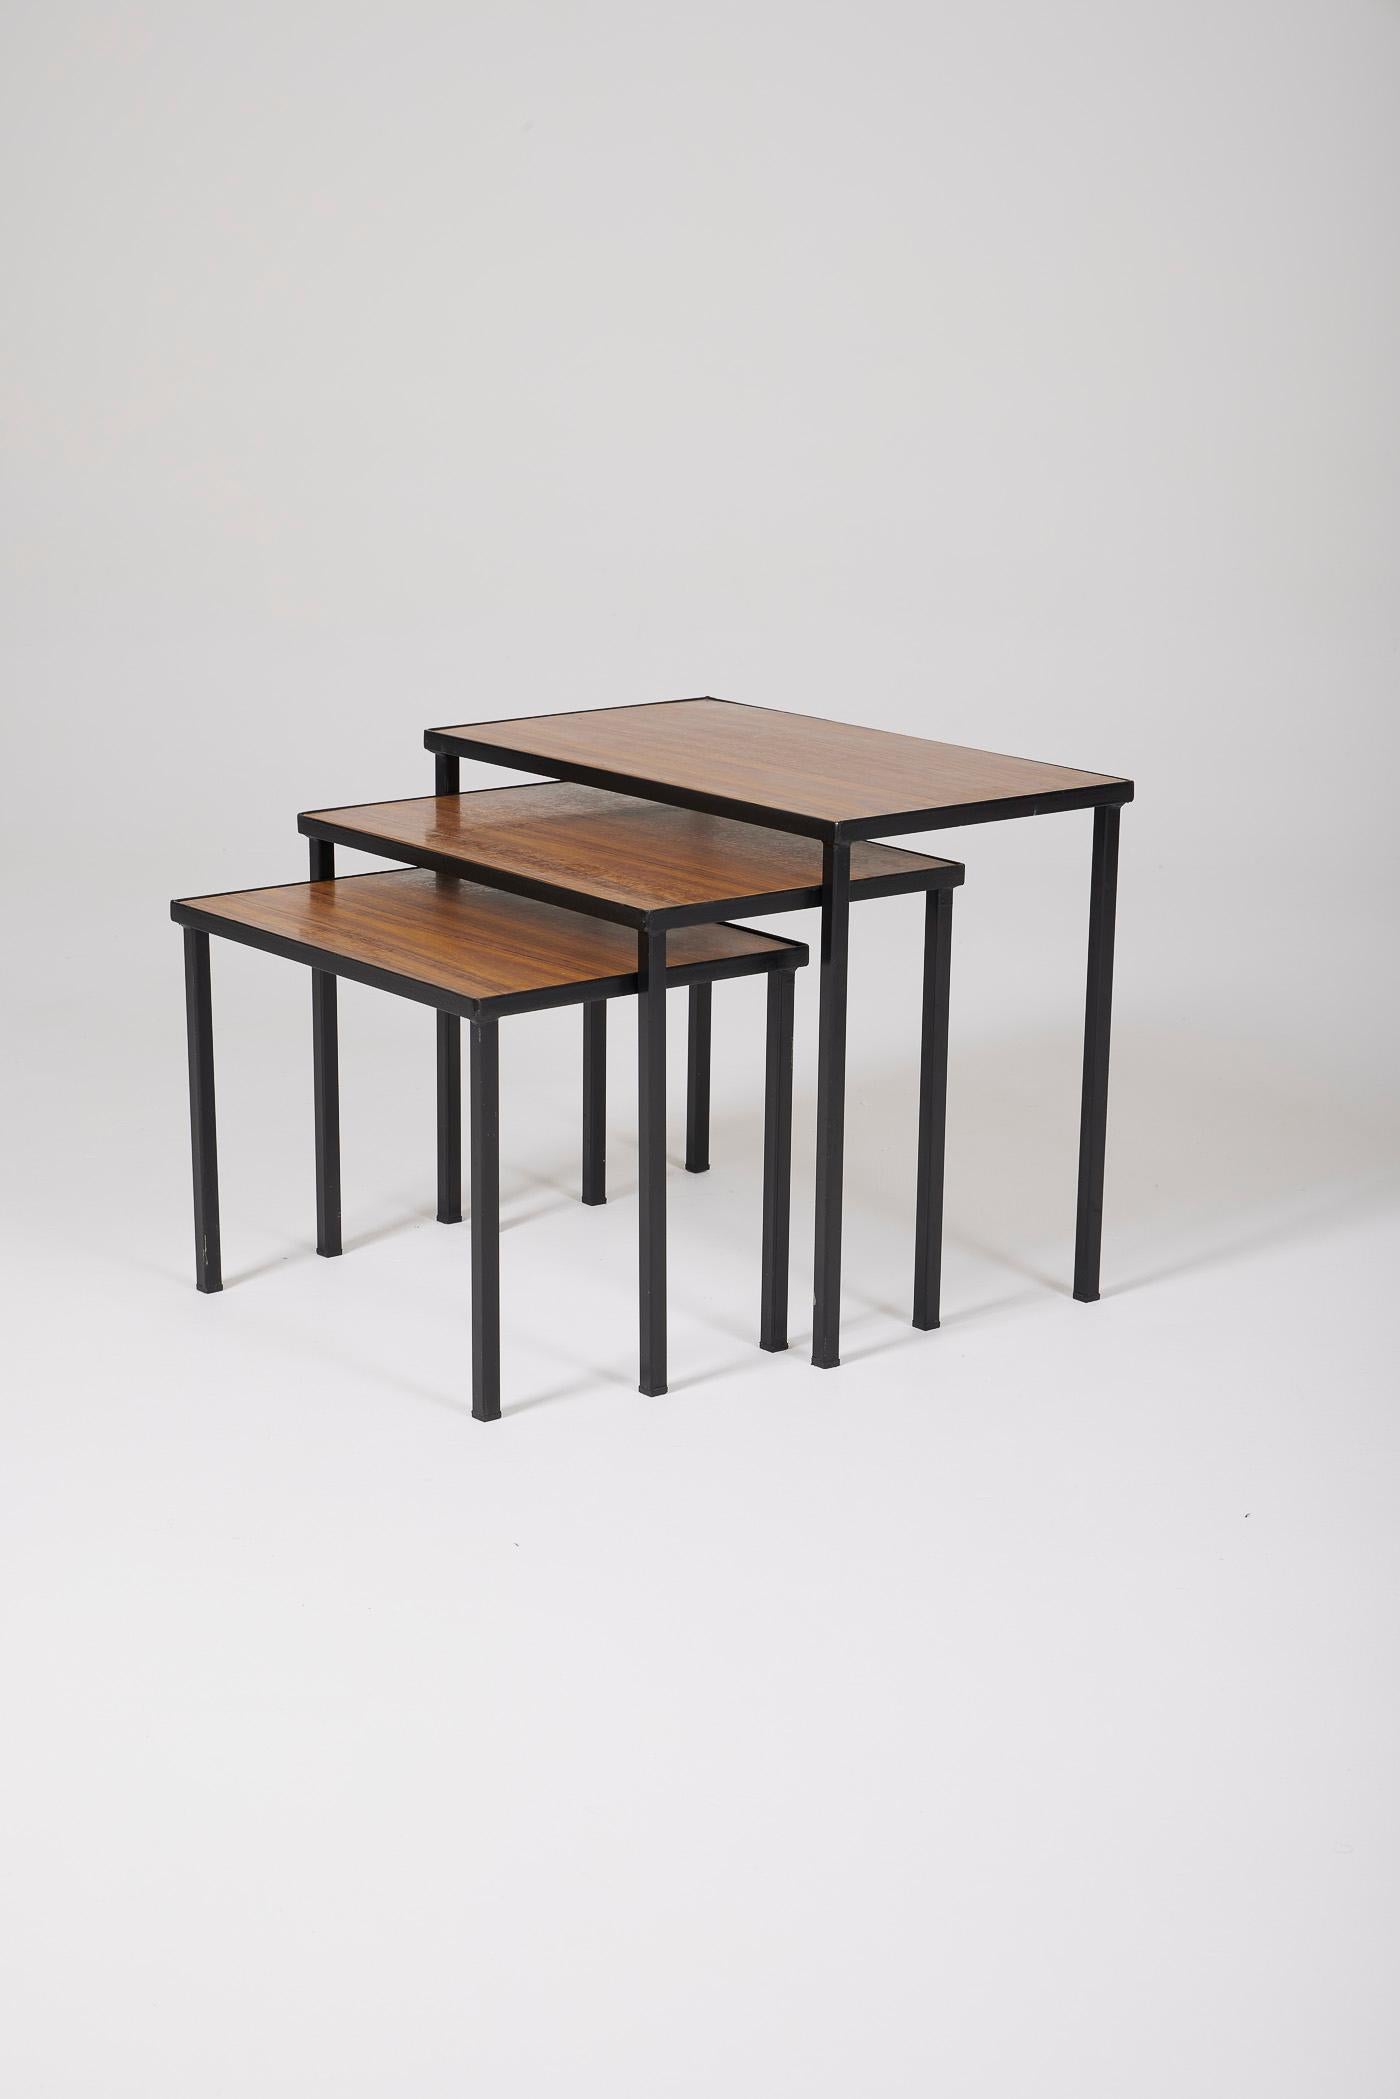 Set of 3 nesting tables with reversible wooden or white formica tops. The base is in black lacquered metal. In very good condition.
DV480